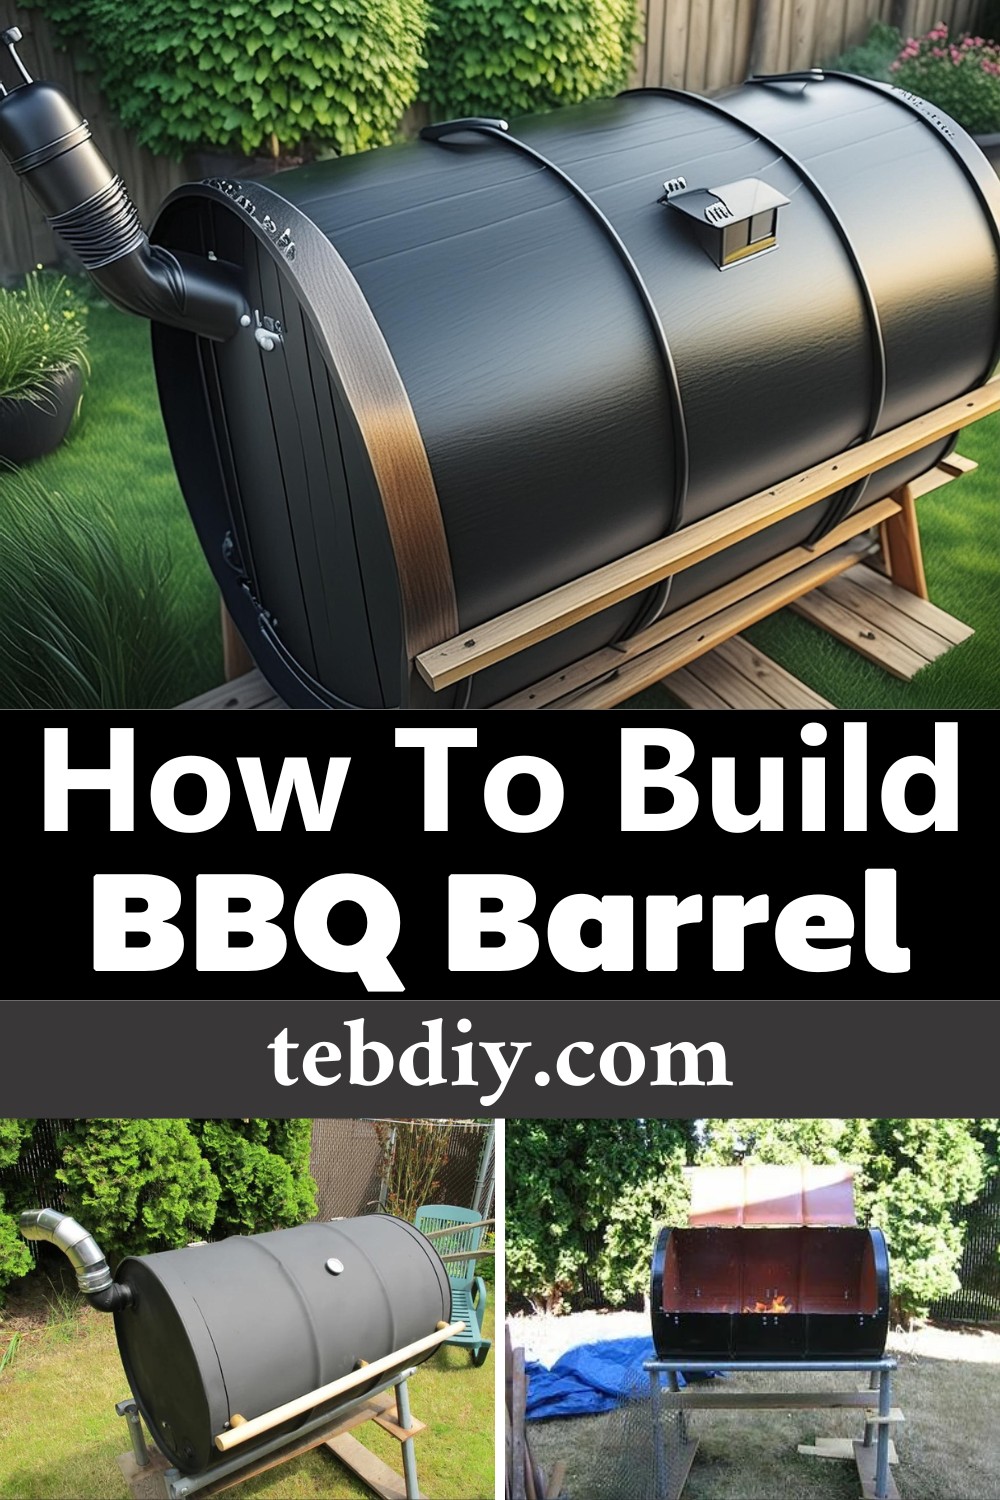 How To Build Your Own Bbq Barrel